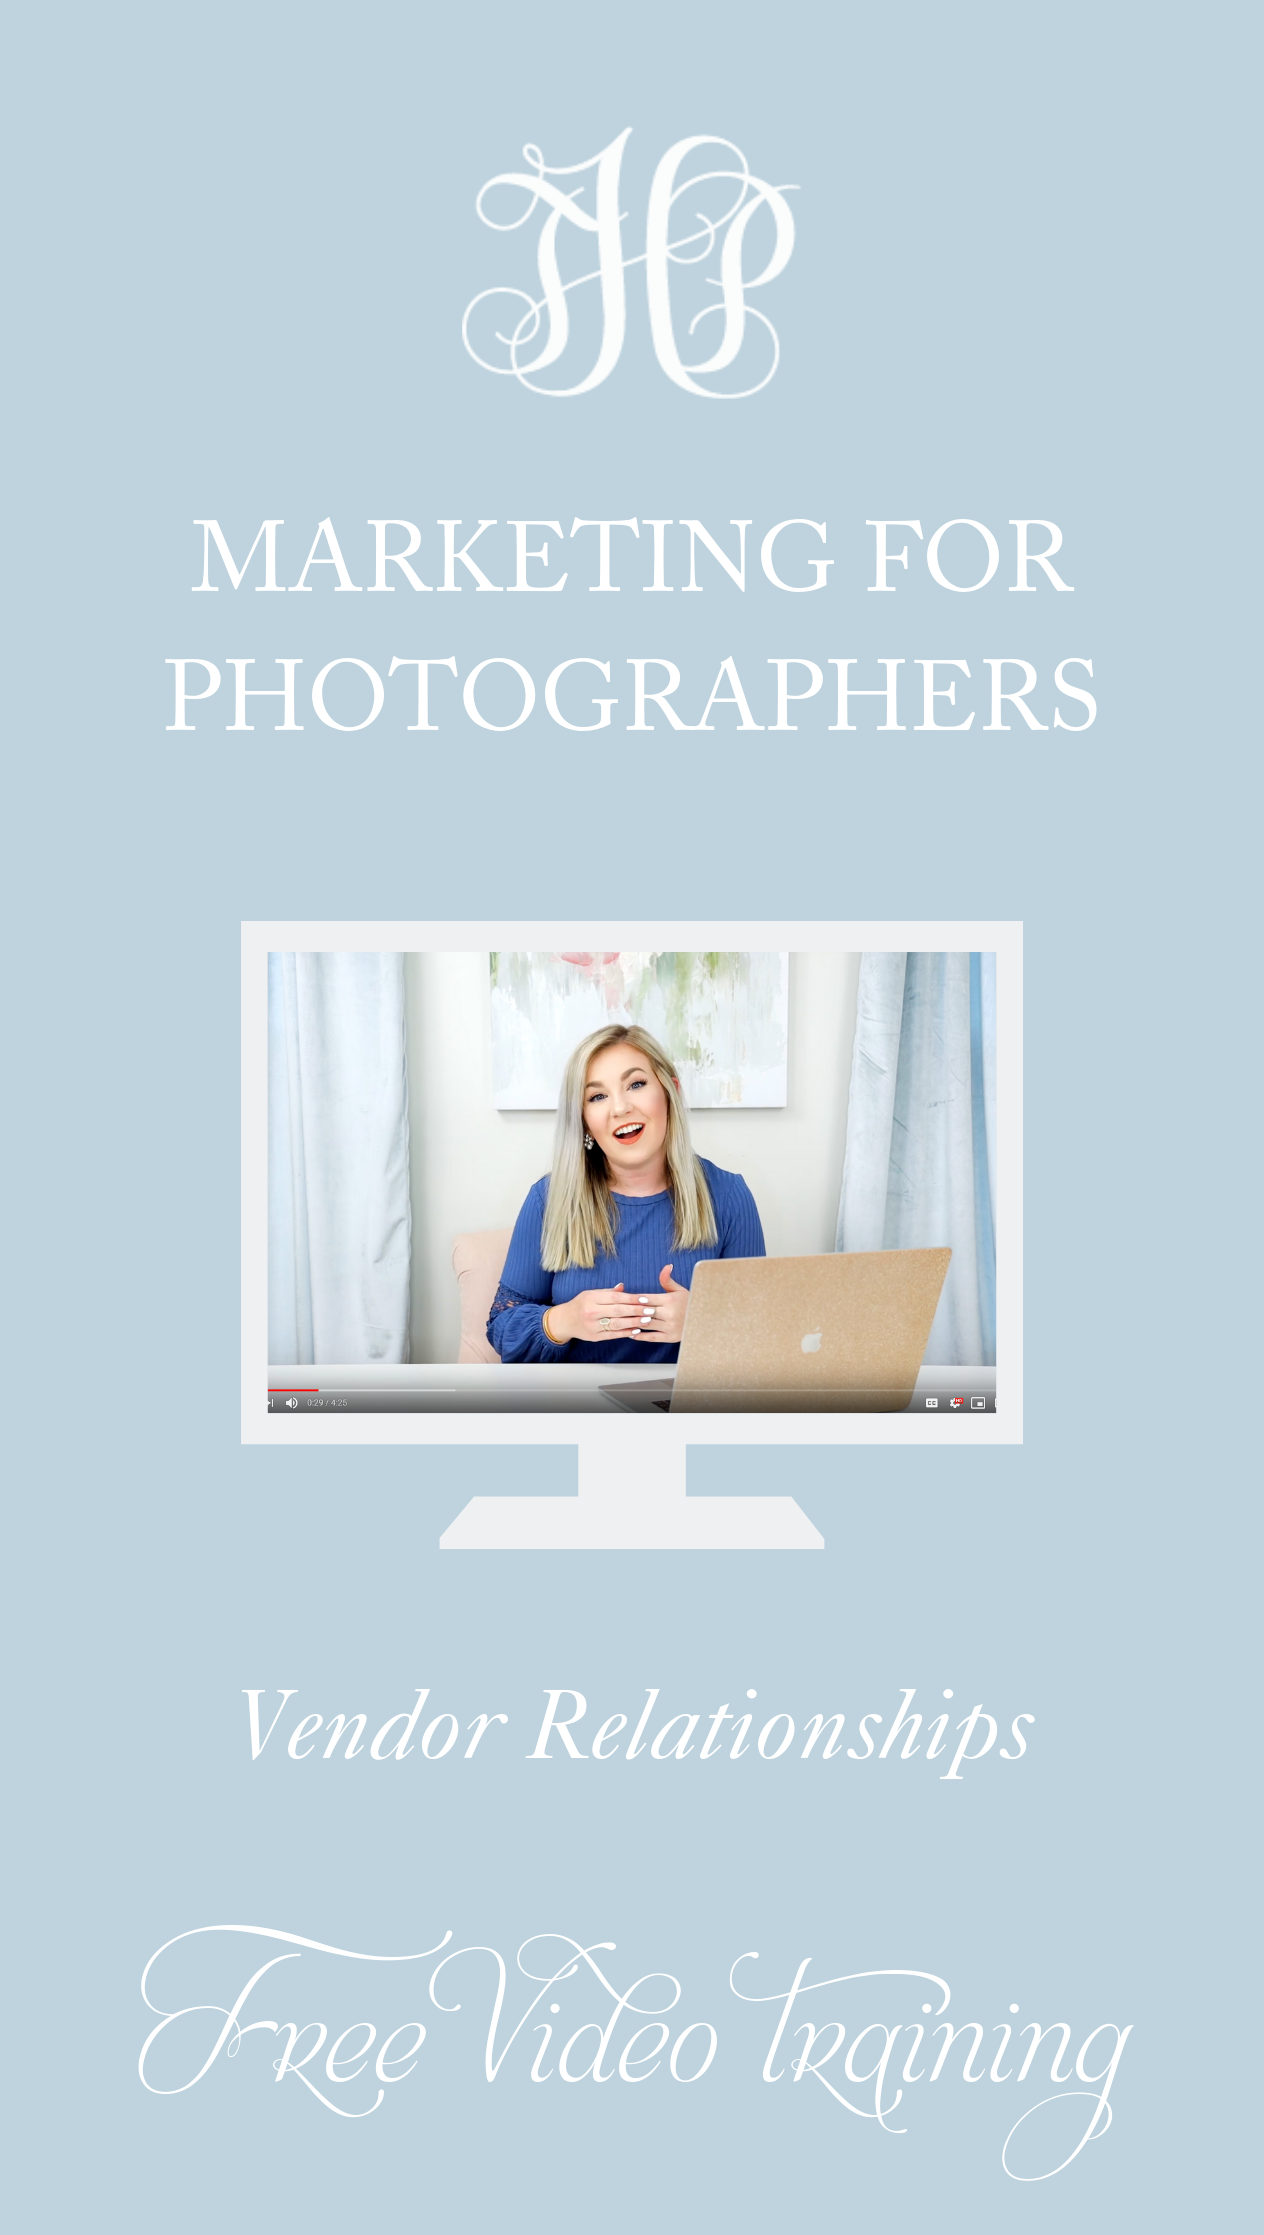 Marketing for Photographers - Vendor Relationships | Happy Hour with Hope Episode #12